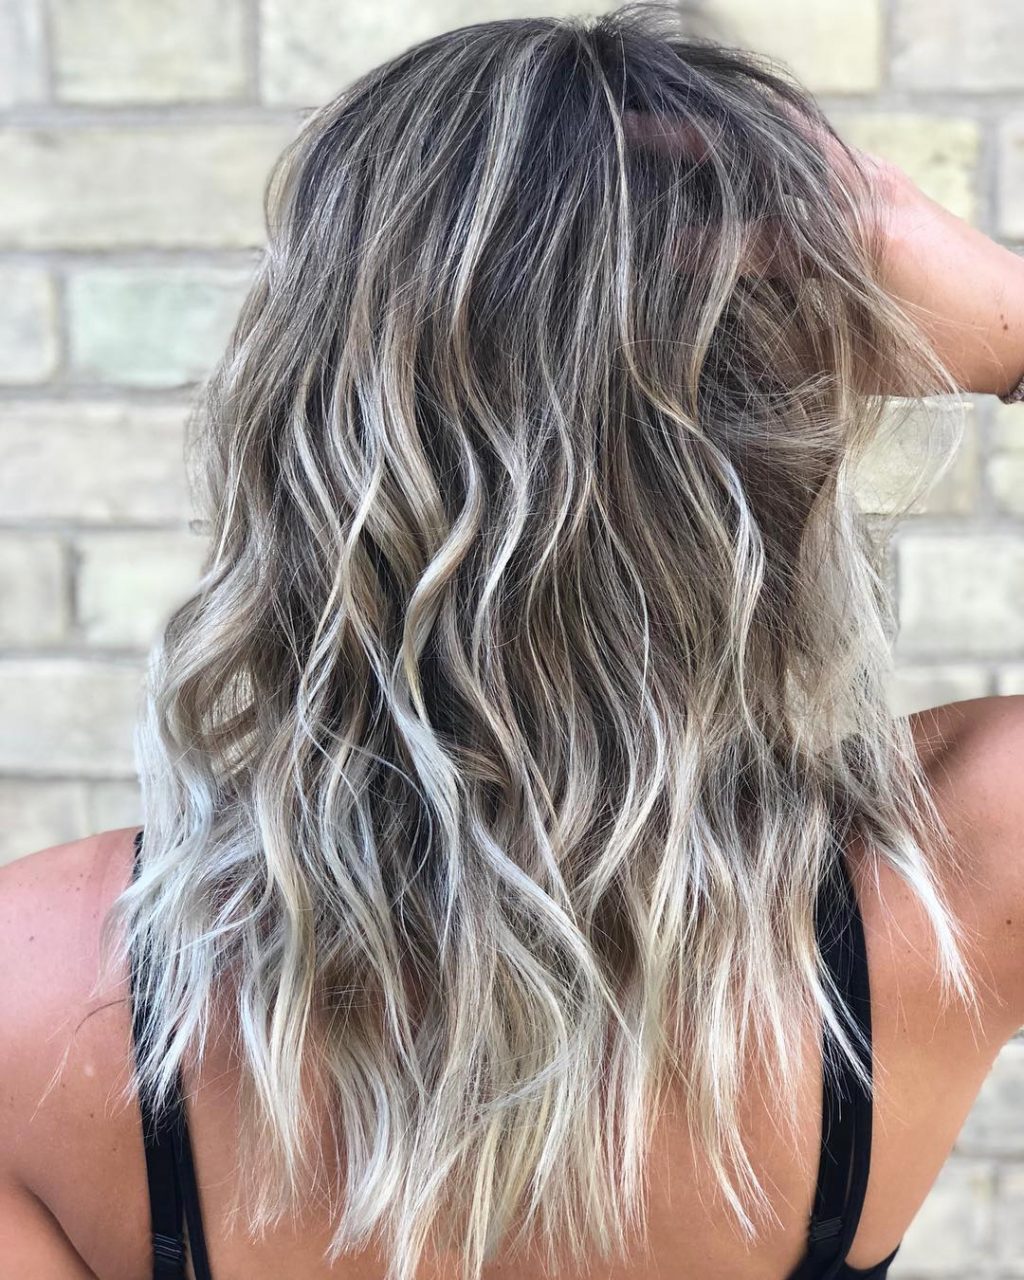 Amazing icy waves hair which uses hydrate shampoo and conditioner